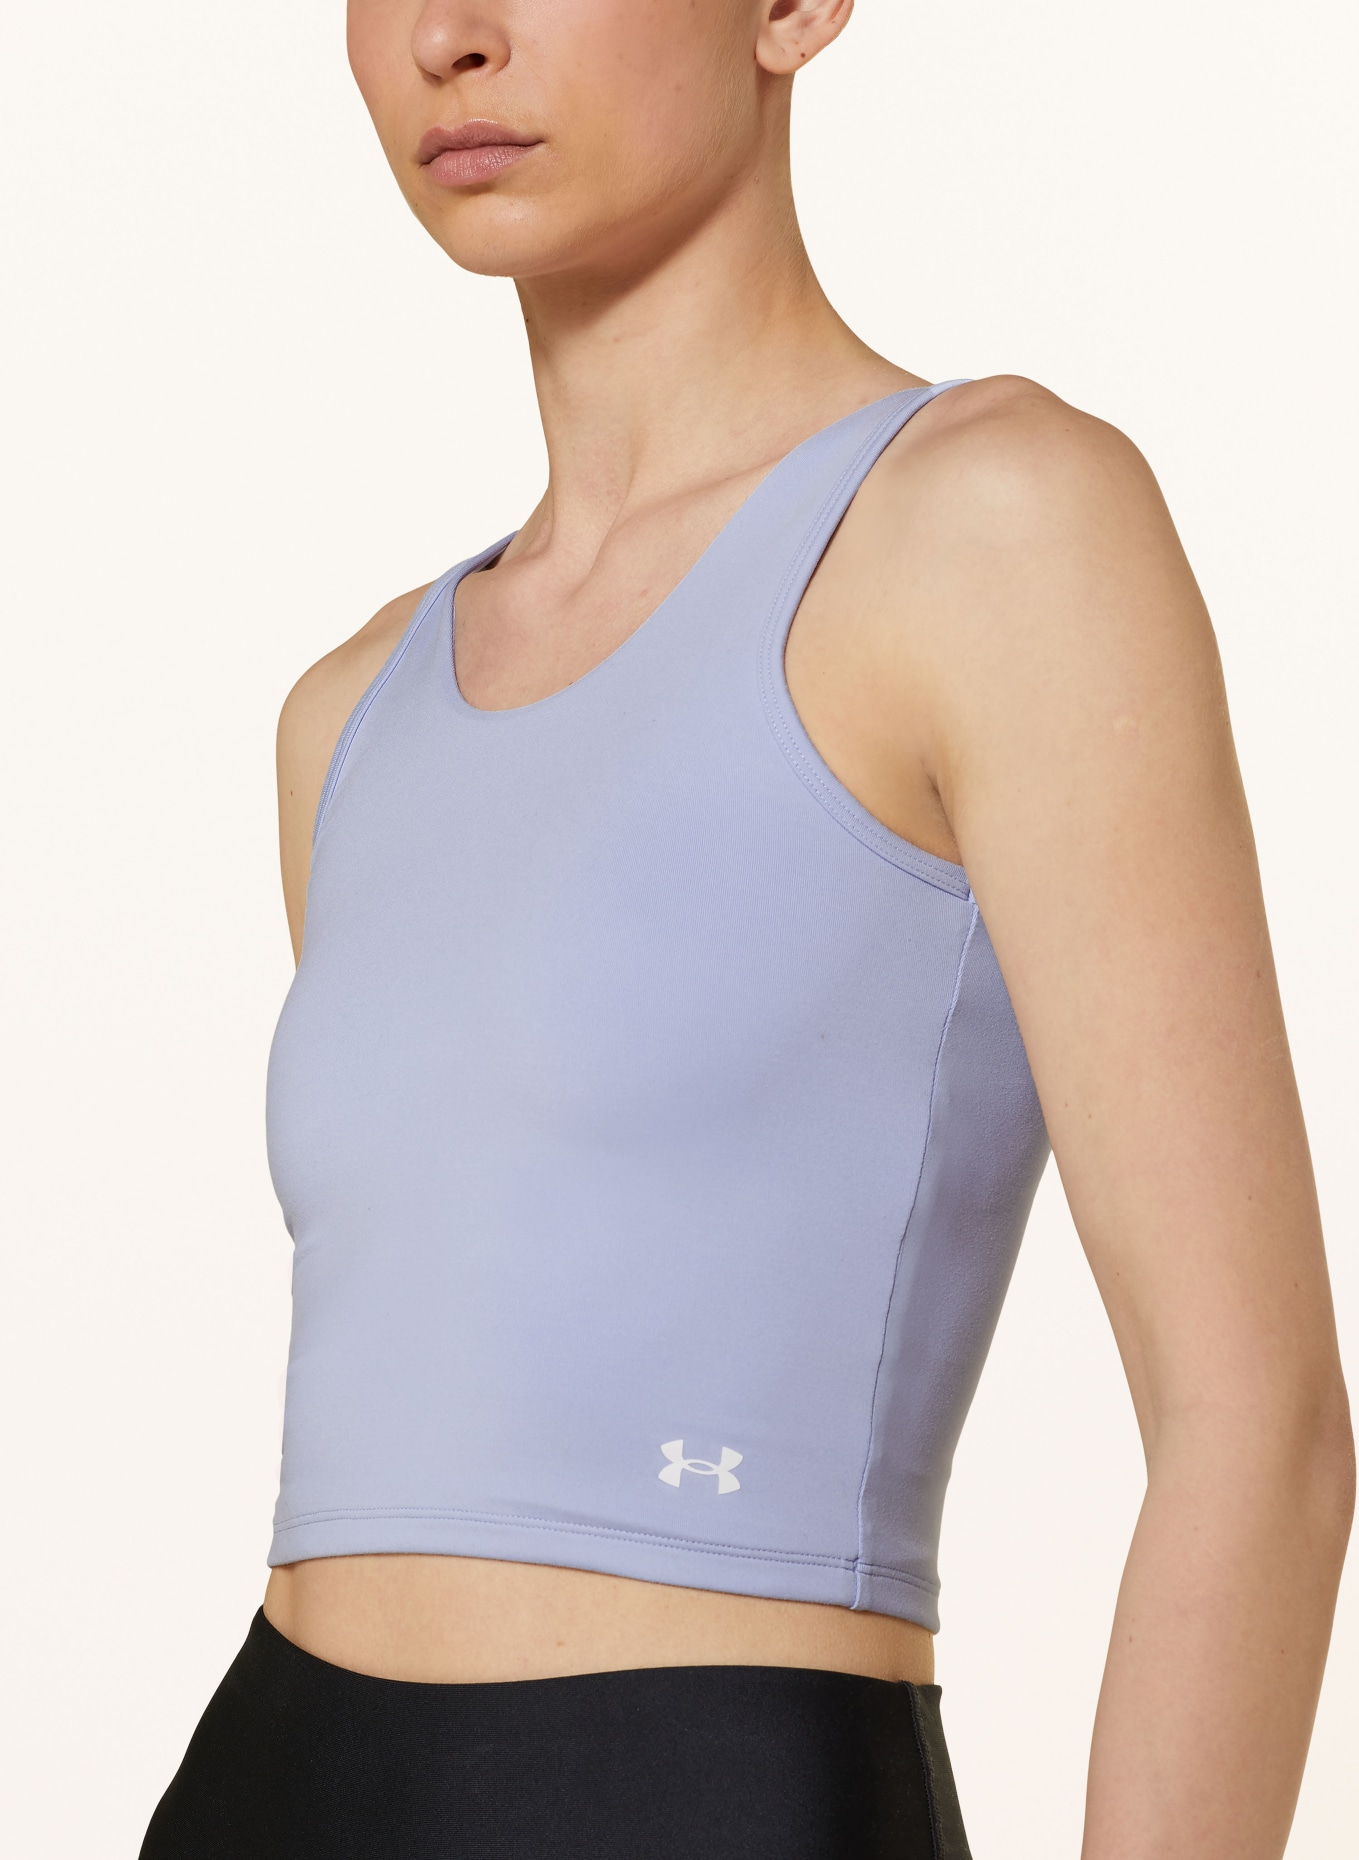 UNDER ARMOUR Cropped-Top UA MOTION, Farbe: HELLLILA (Bild 4)